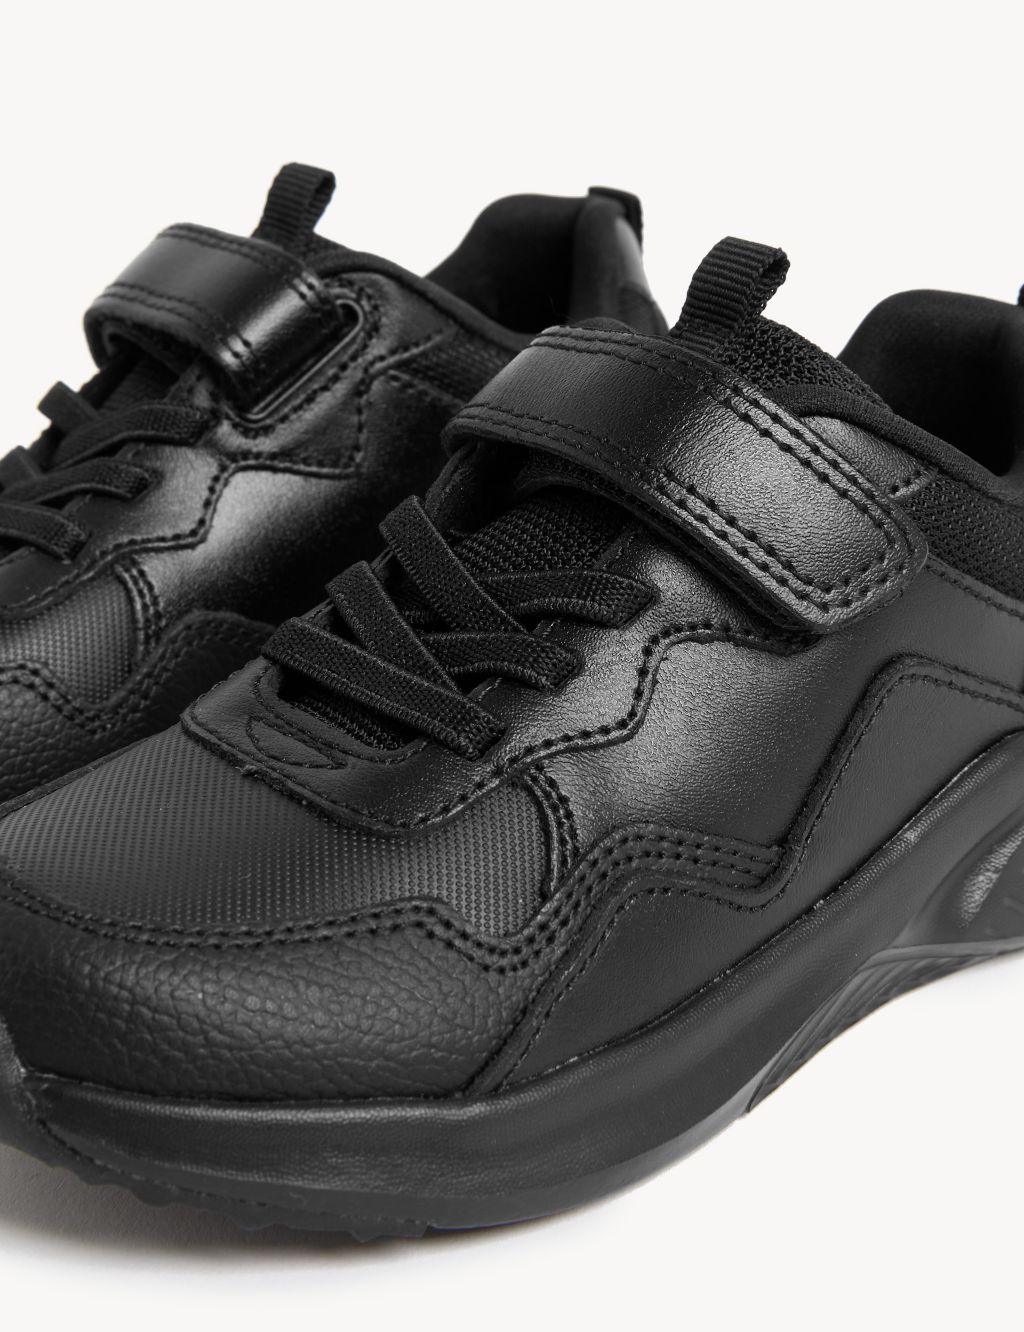 Kids' Leather Freshfeet™ School Shoes (8 Small-2 Large) image 3